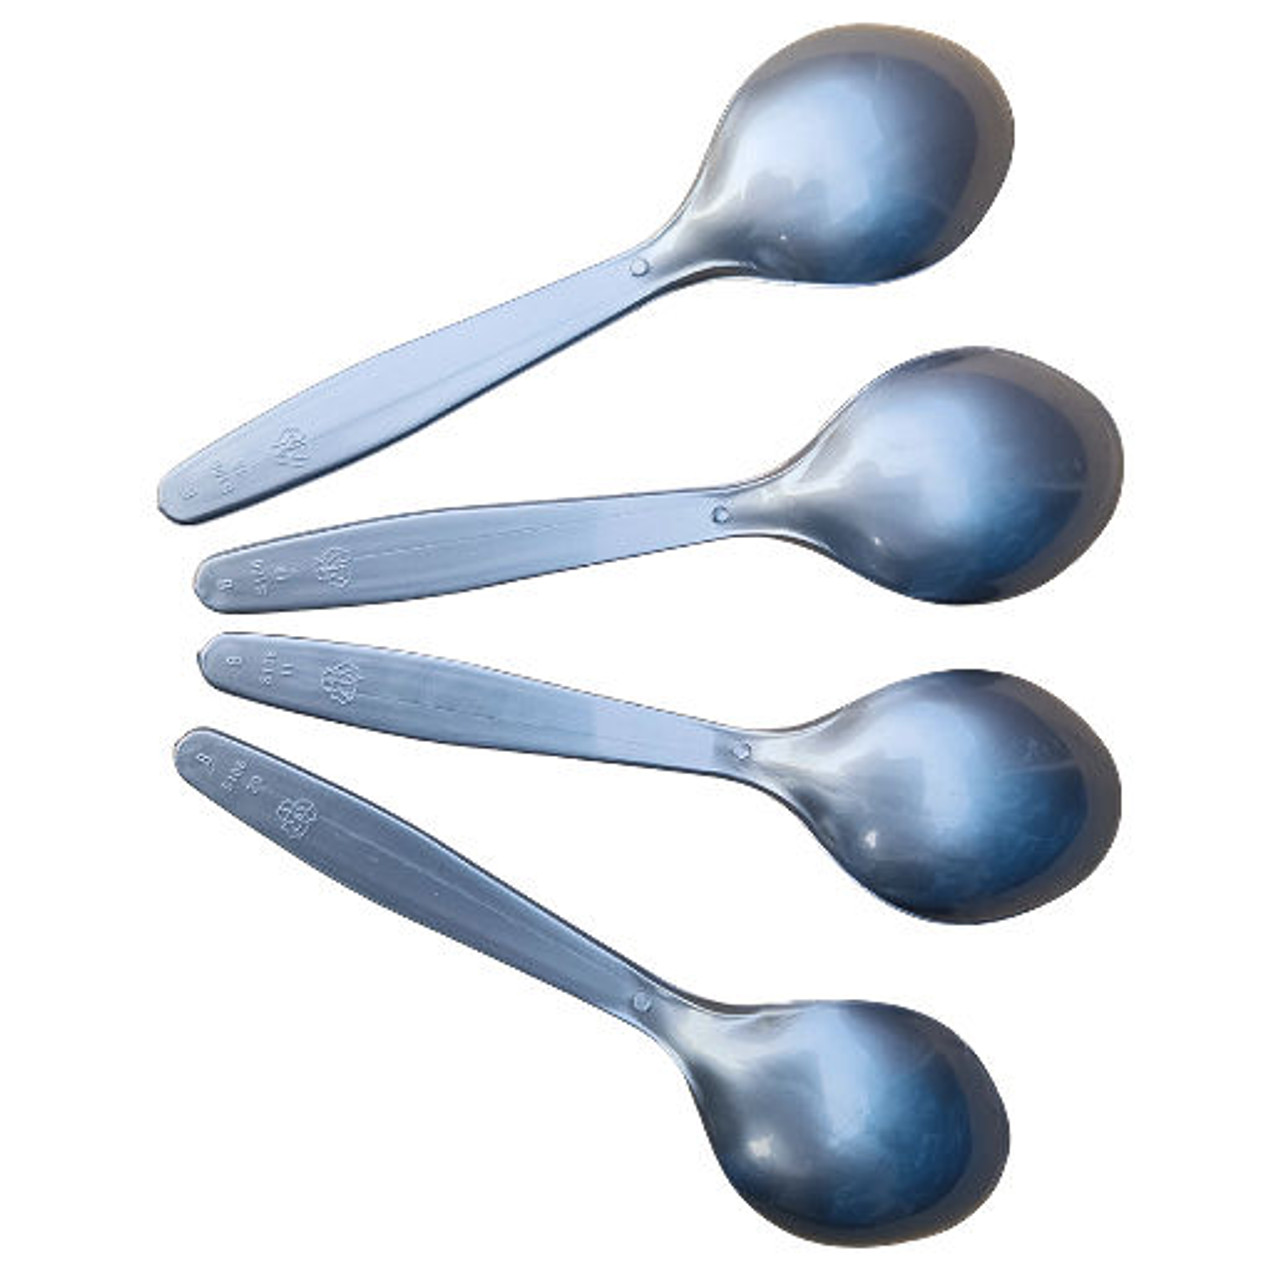 Re-usable / Recyclable Strong Plastic Silver effect Spoons packed in 100's